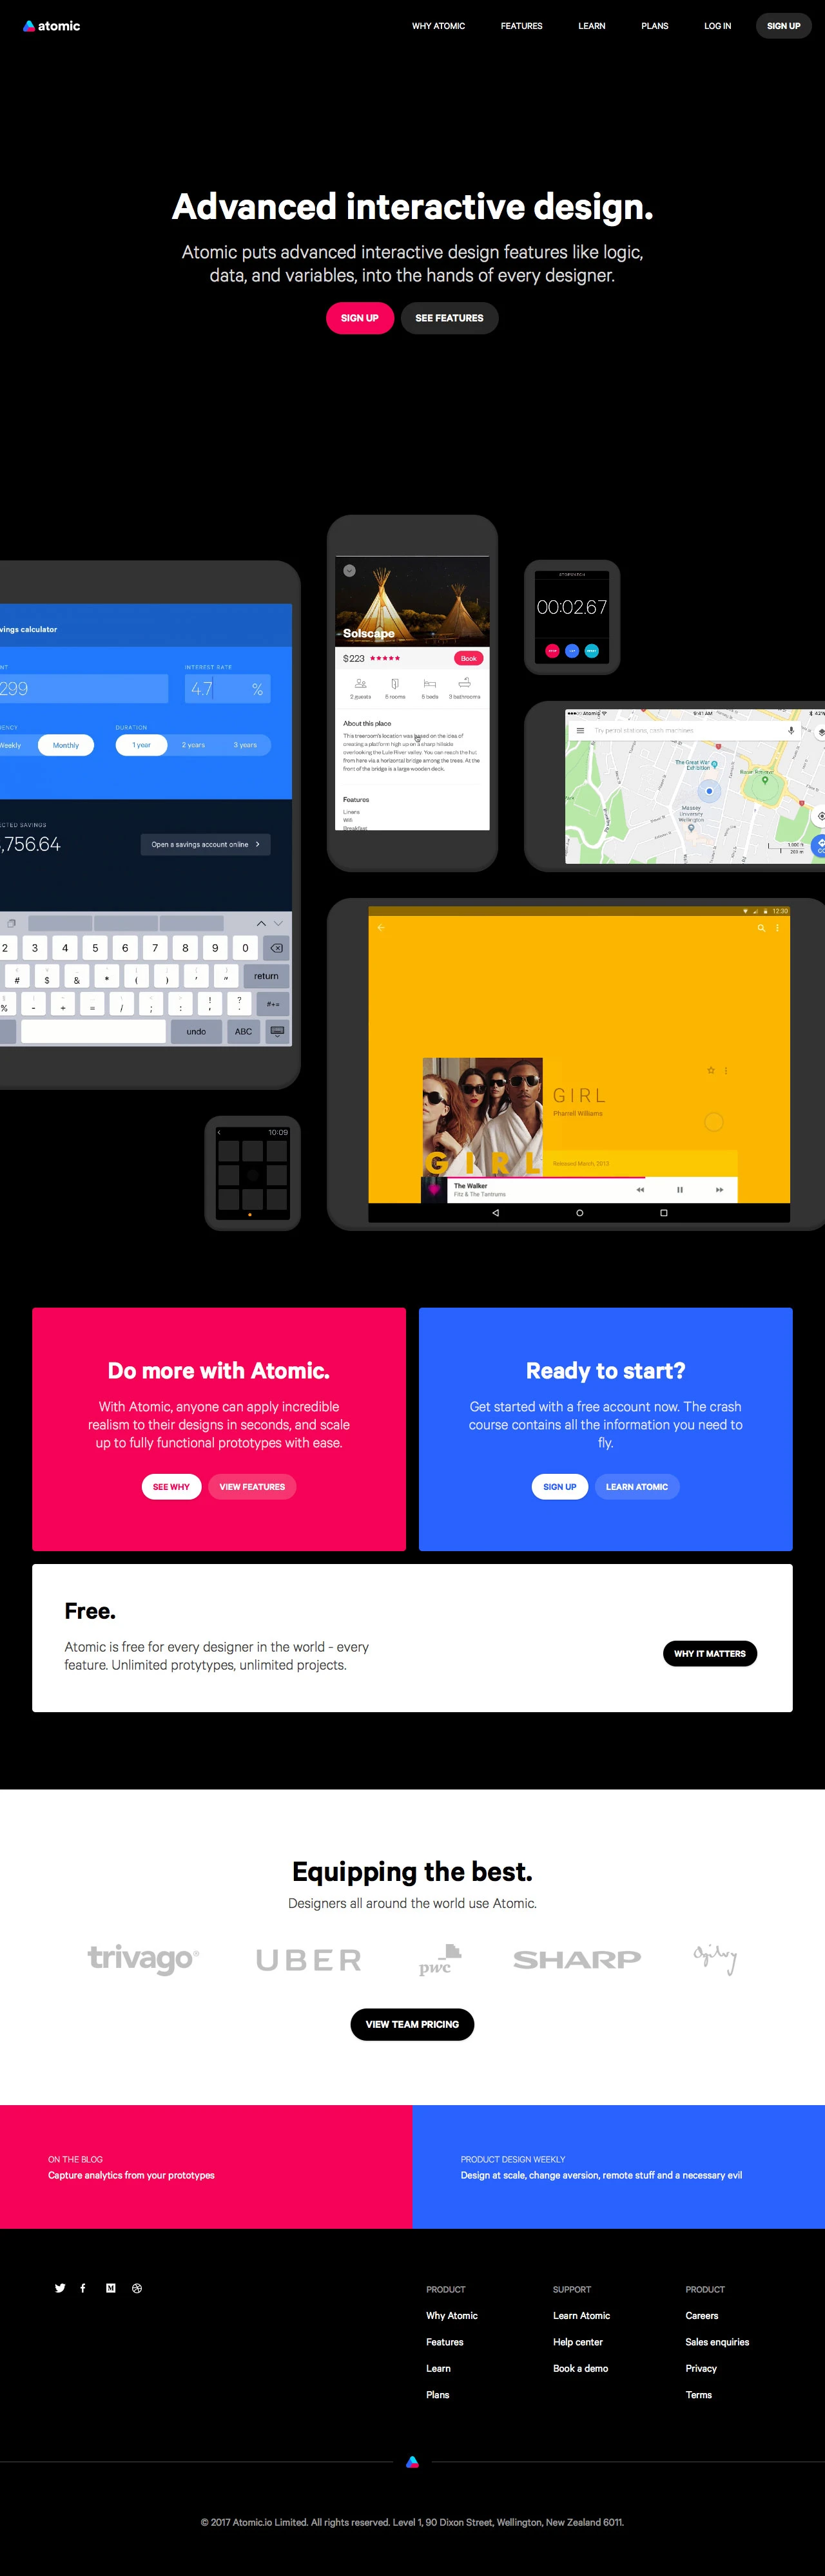 Atomic Landing Page Example: Atomic puts advanced interactive design features like logic, data, and variables, into the hands of every designer.